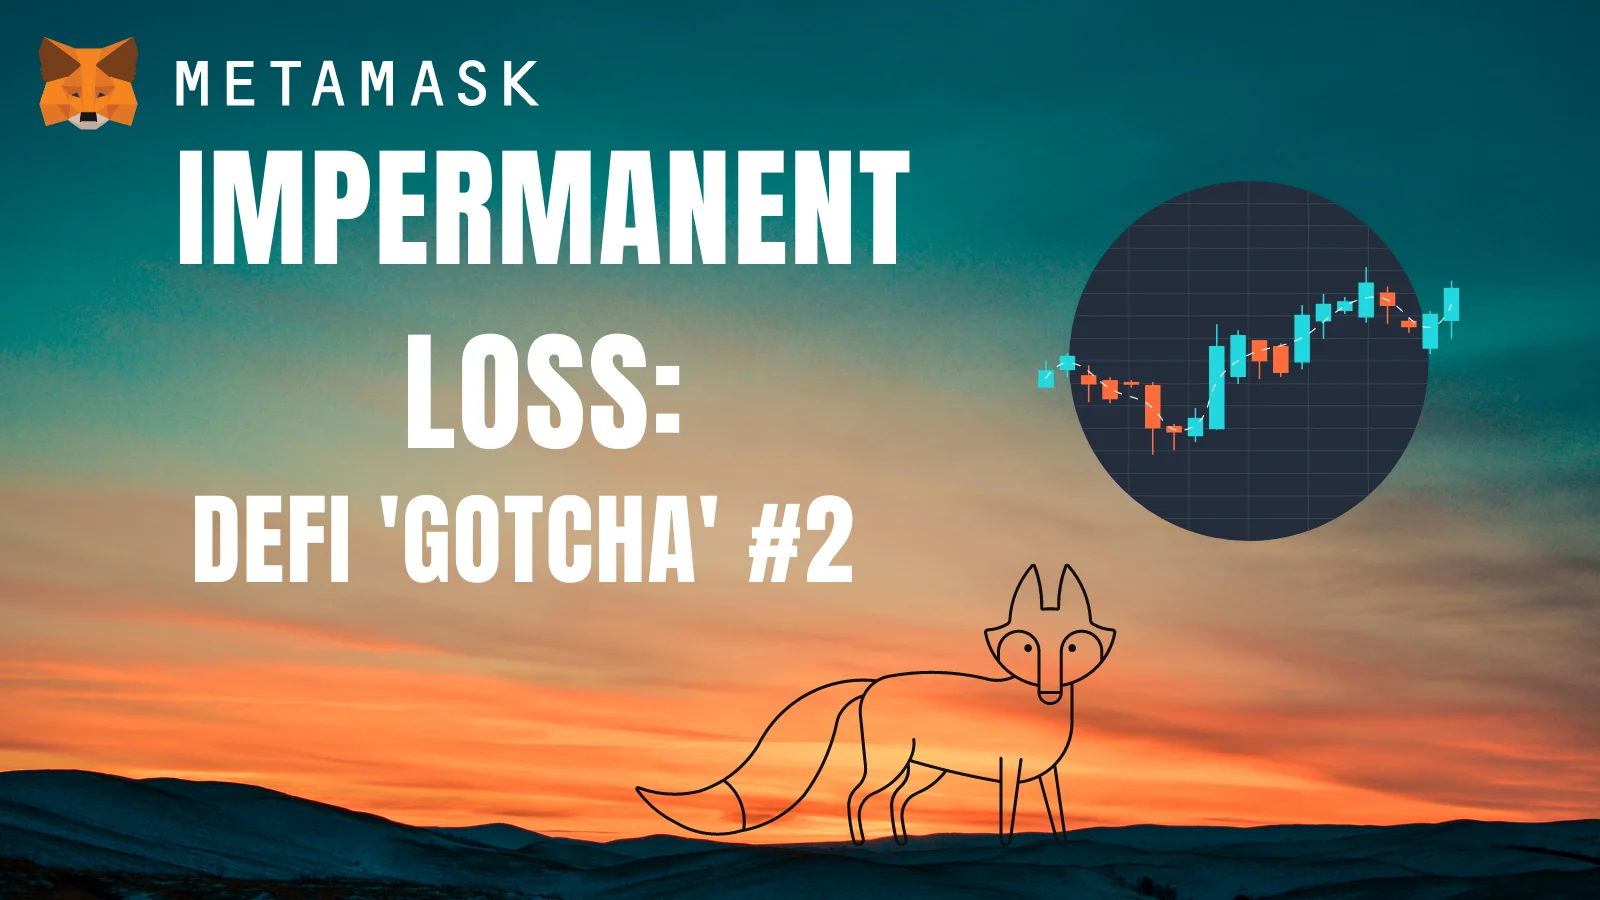 Image: Impermanent Loss: DeFi Markets 'Gotcha' Number Two